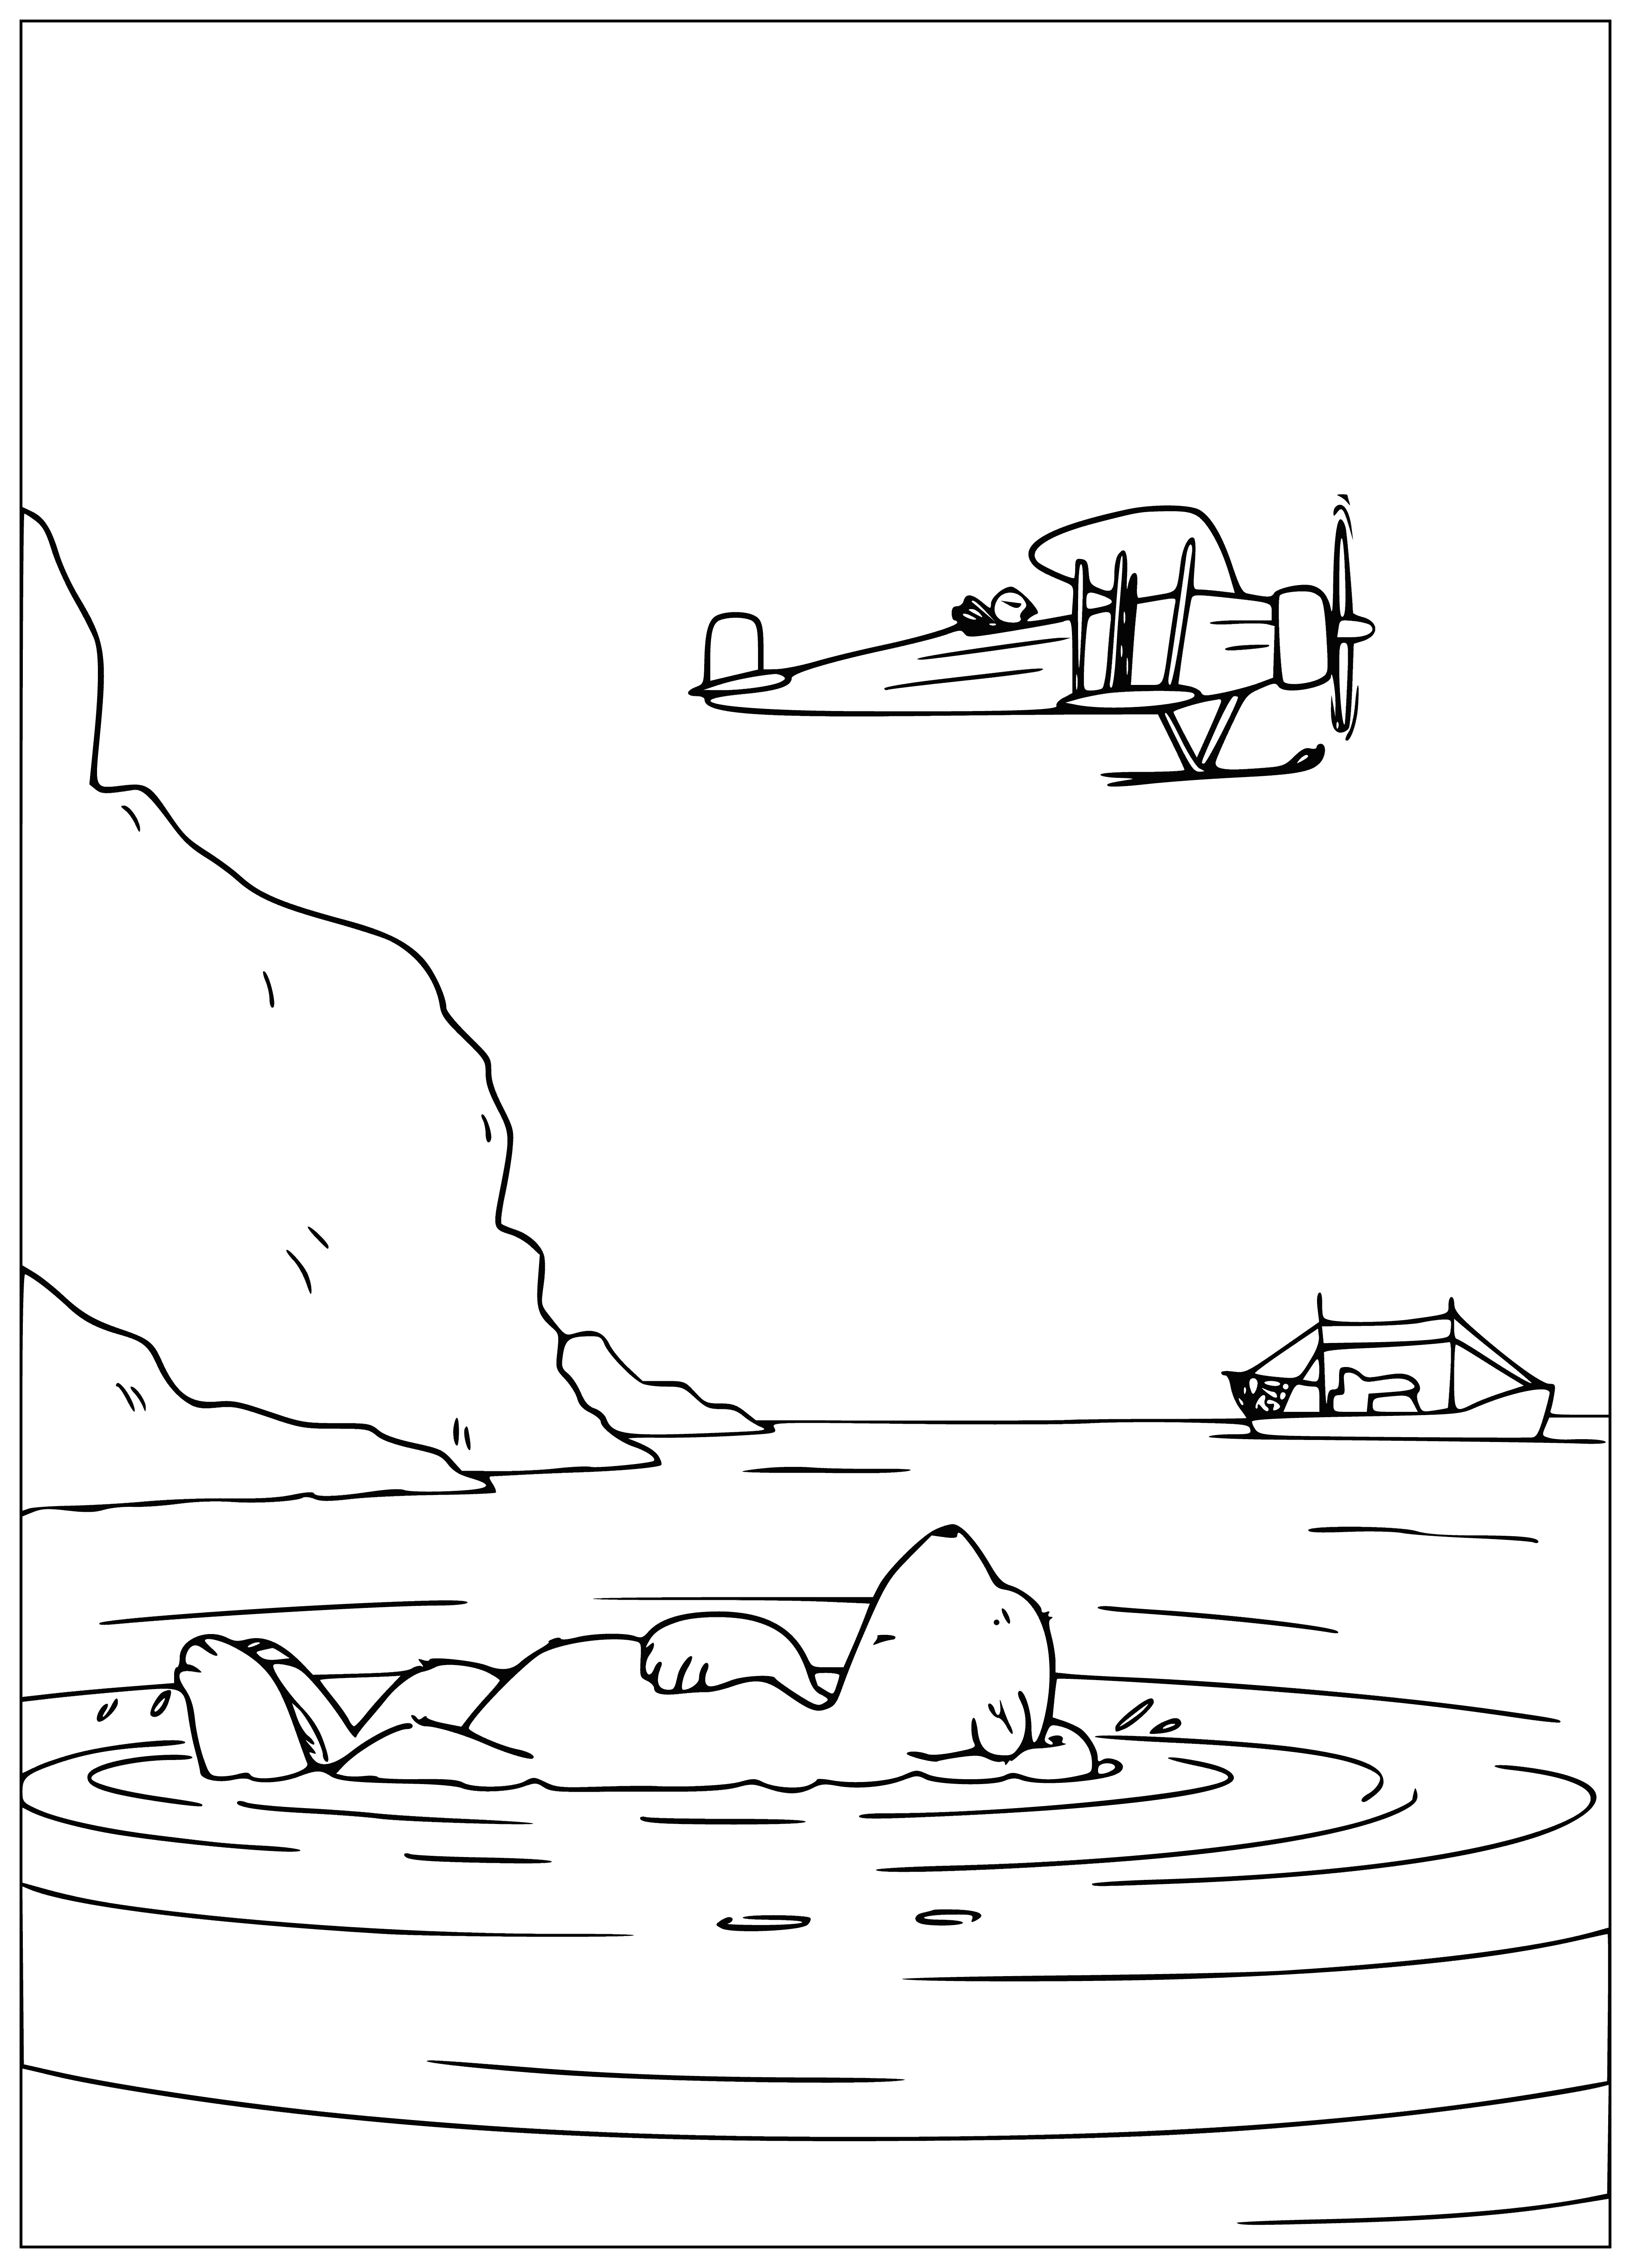 On the waves coloring page